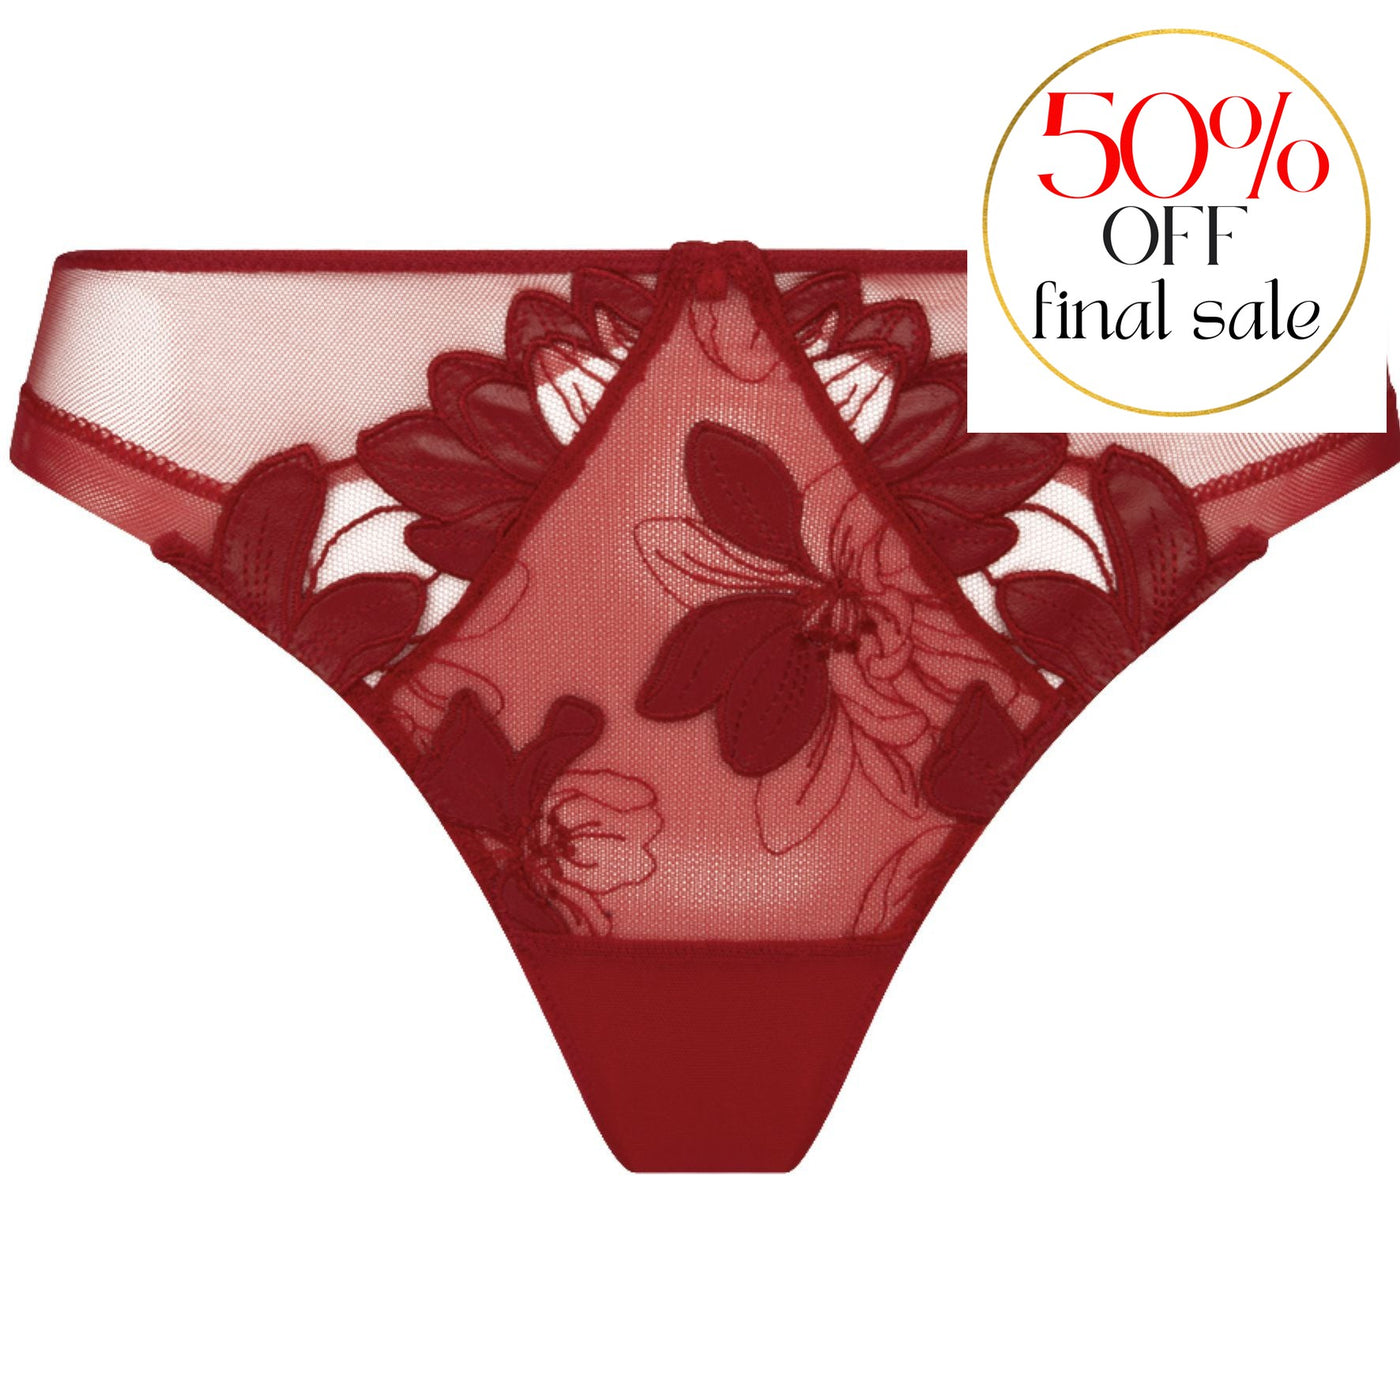 Lise Charmel Glamour Couture Italian Brief ACH0707 in Rouge Cuir-Panties-Lise Charmel-Rouge Cuir-XSmall-Anna Bella Fine Lingerie, Reveal Your Most Gorgeous Self!